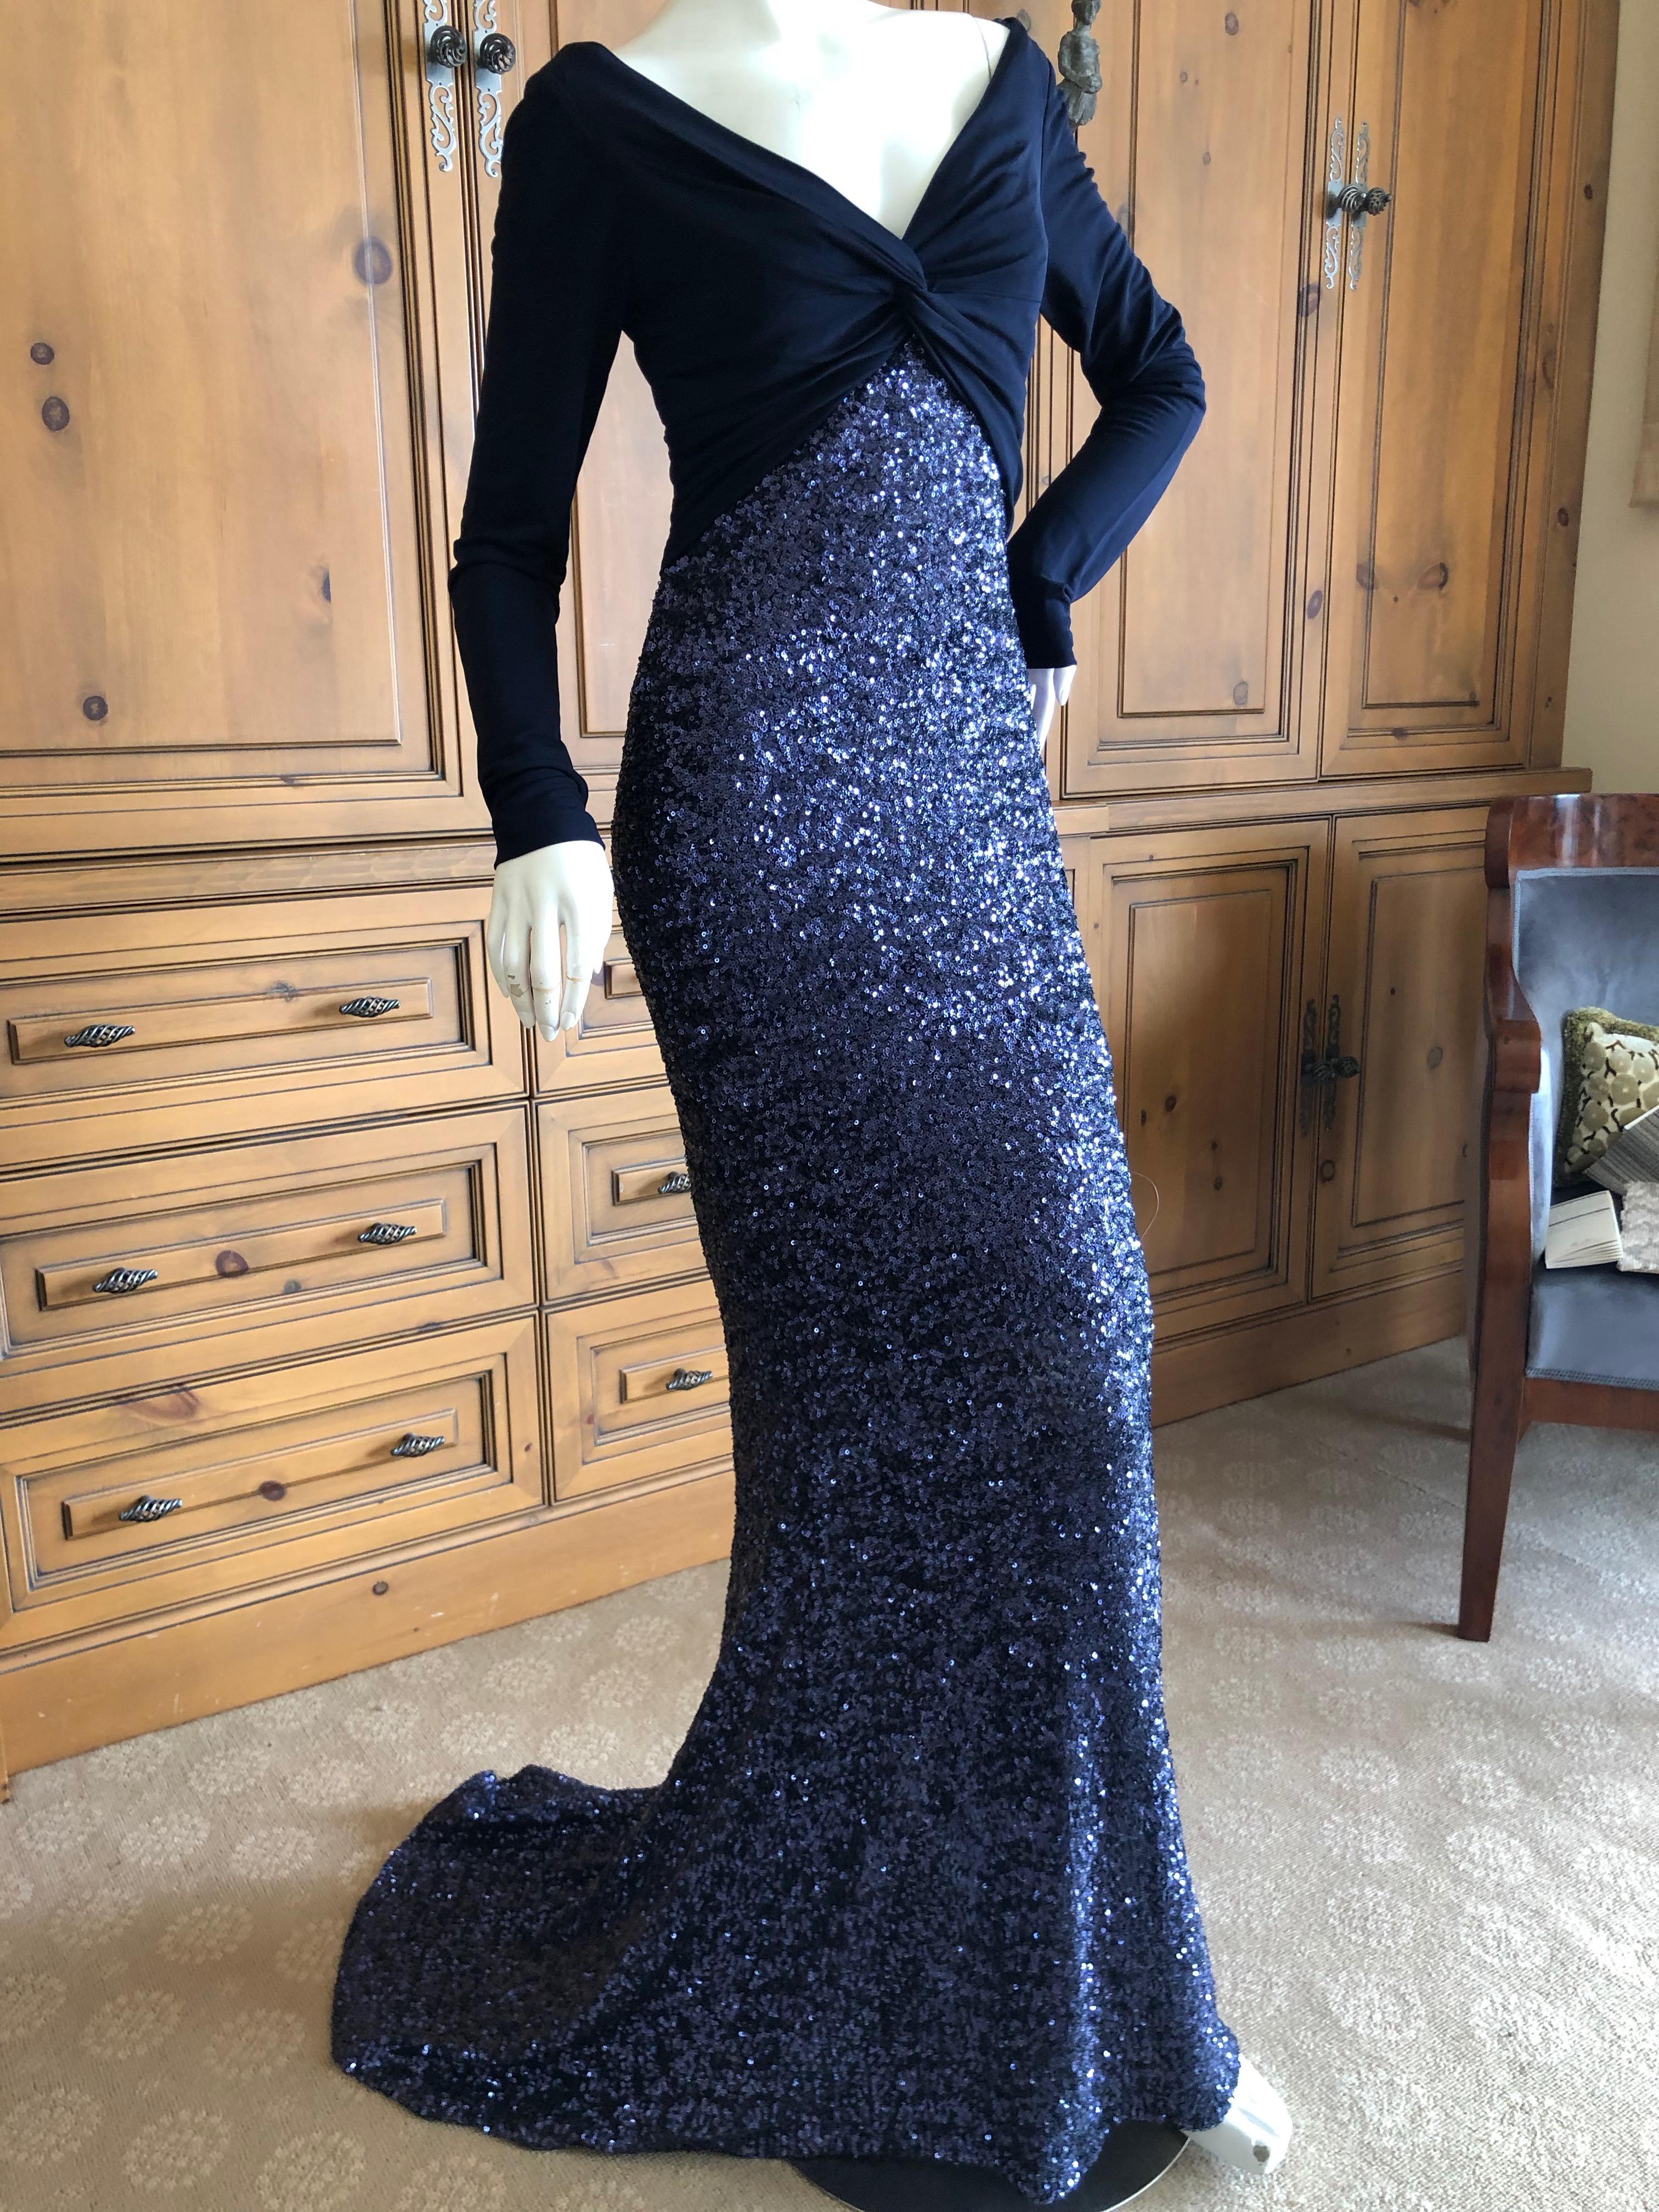 Dolce & Gabbana for D&G Vintage Navy Blue Low Cut Silk Sequin Evening Gown 
There is  a lot of stretch, this is so pretty.
Size 42
Bust 38